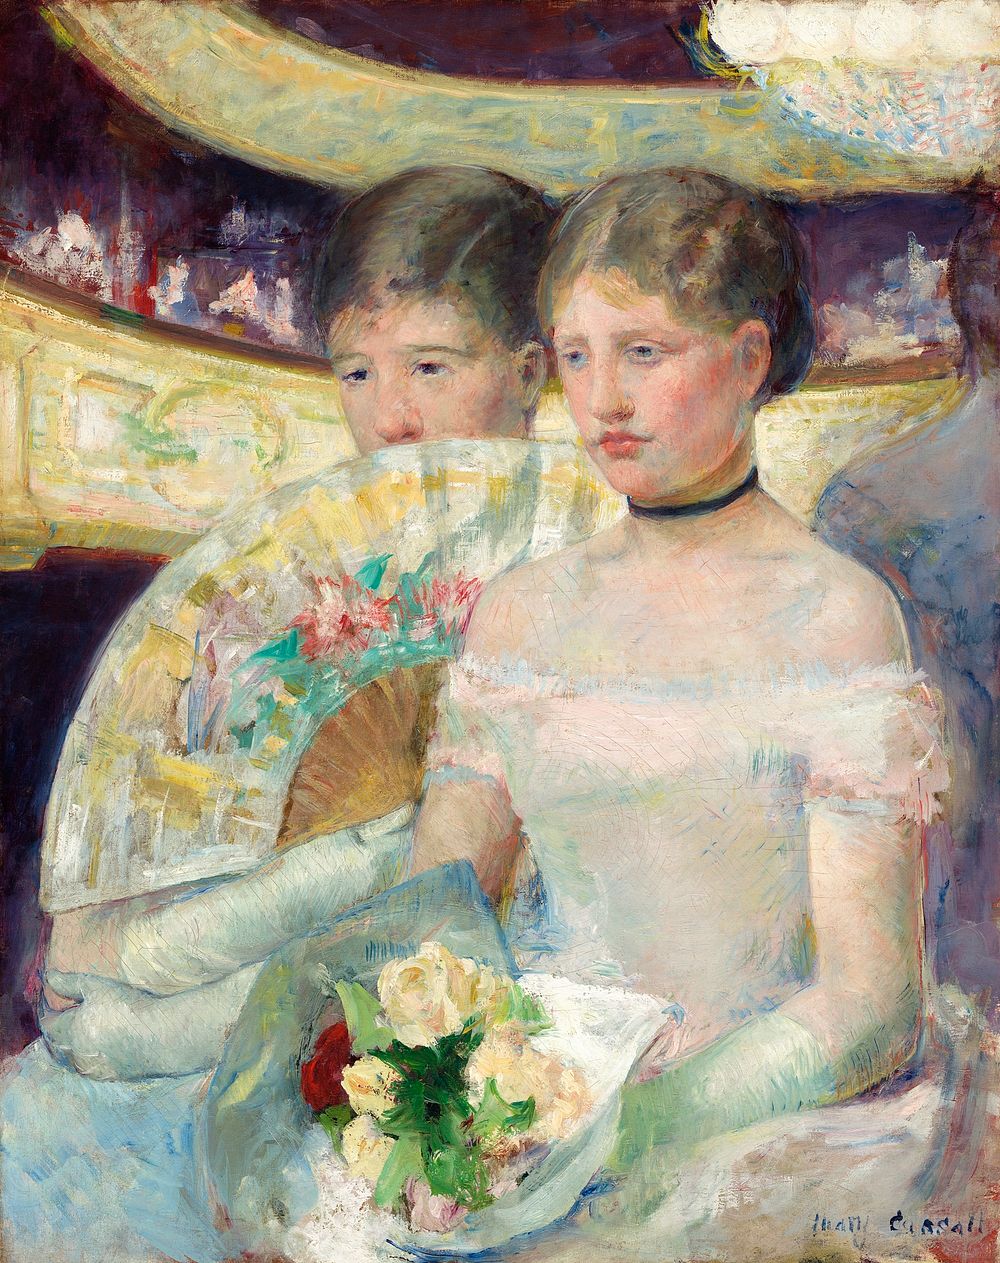 The Loge (1878&ndash;1880) by Mary Cassatt. Original portrait painting from The National Gallery of Art. Digitally enhanced…